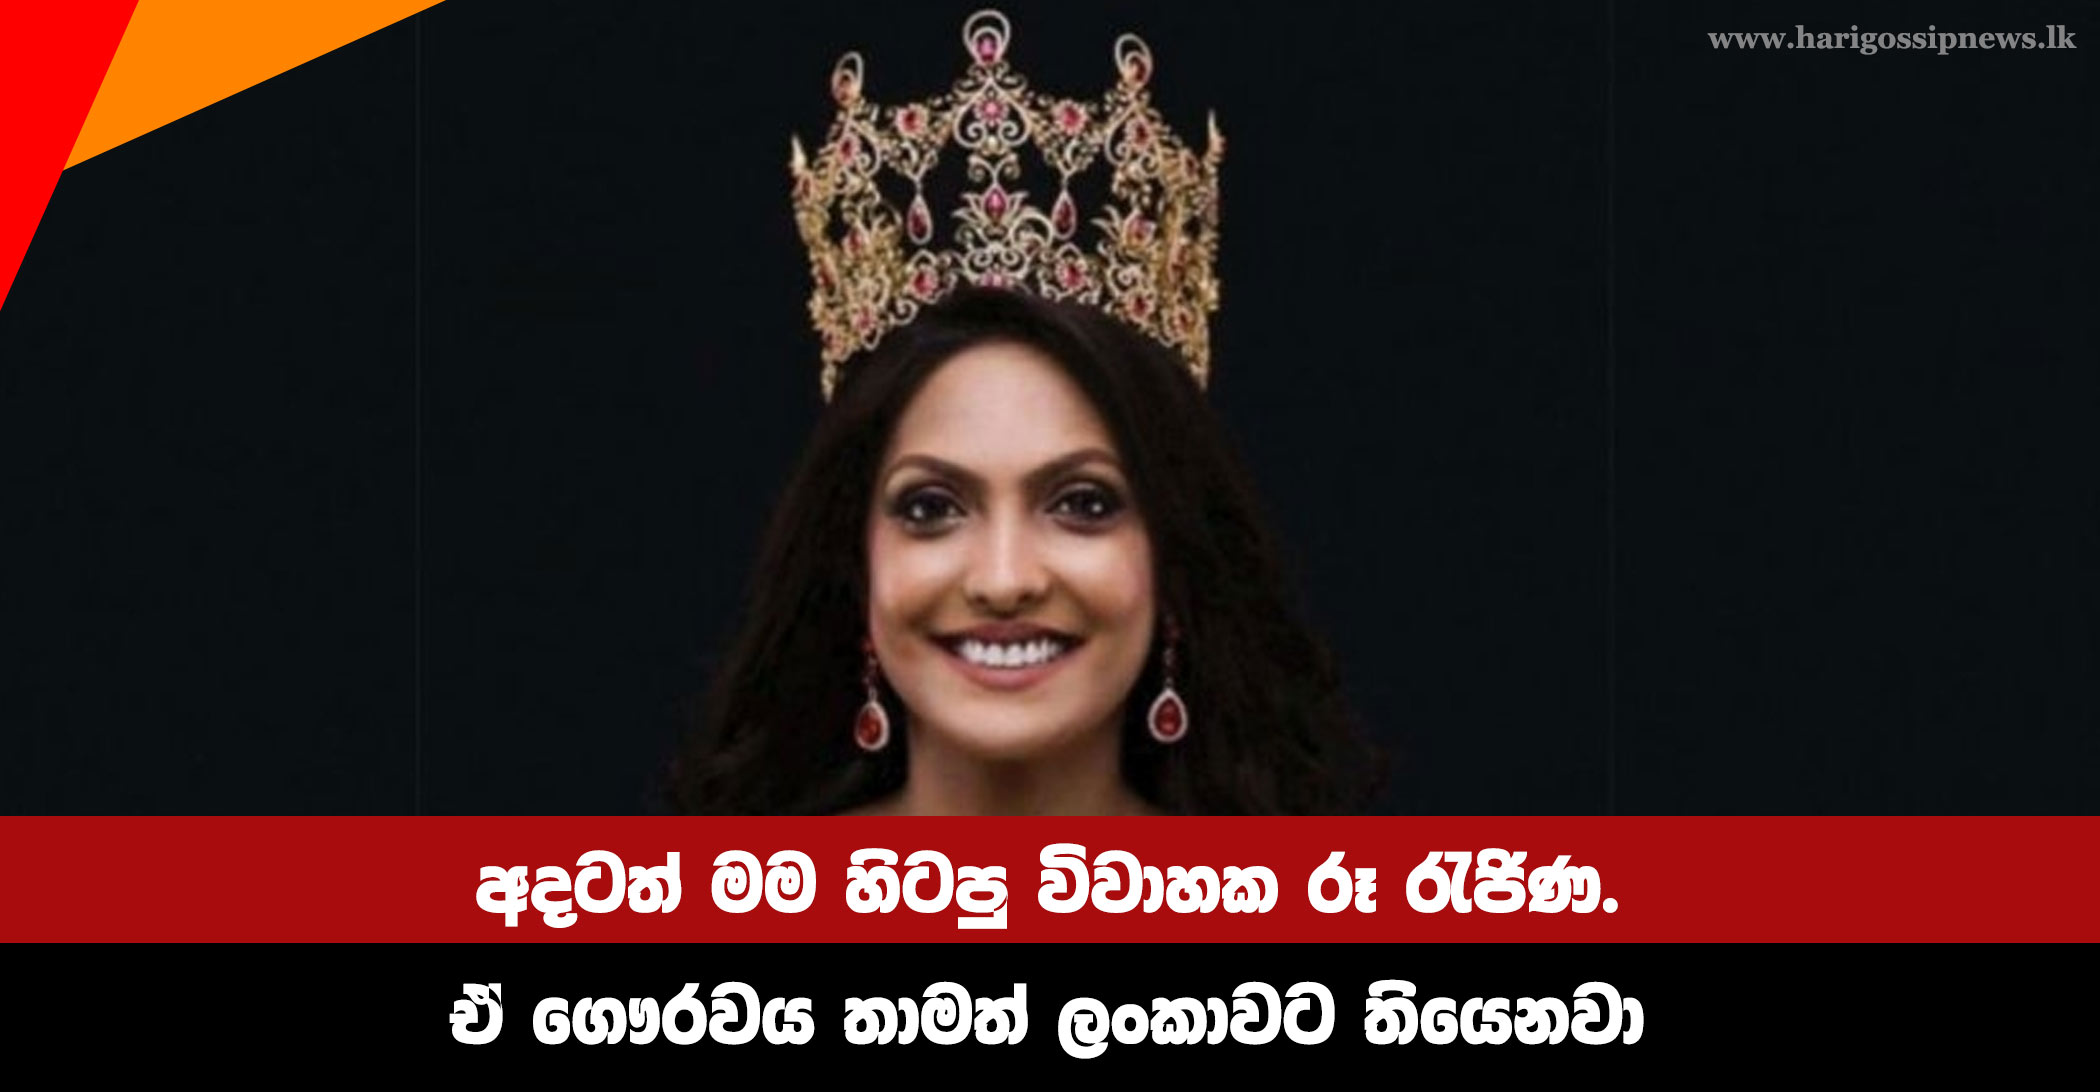 To-this-day,-I-am-a-former-bridal-beauty-queen.-Sri-Lanka-still-has-that-honor